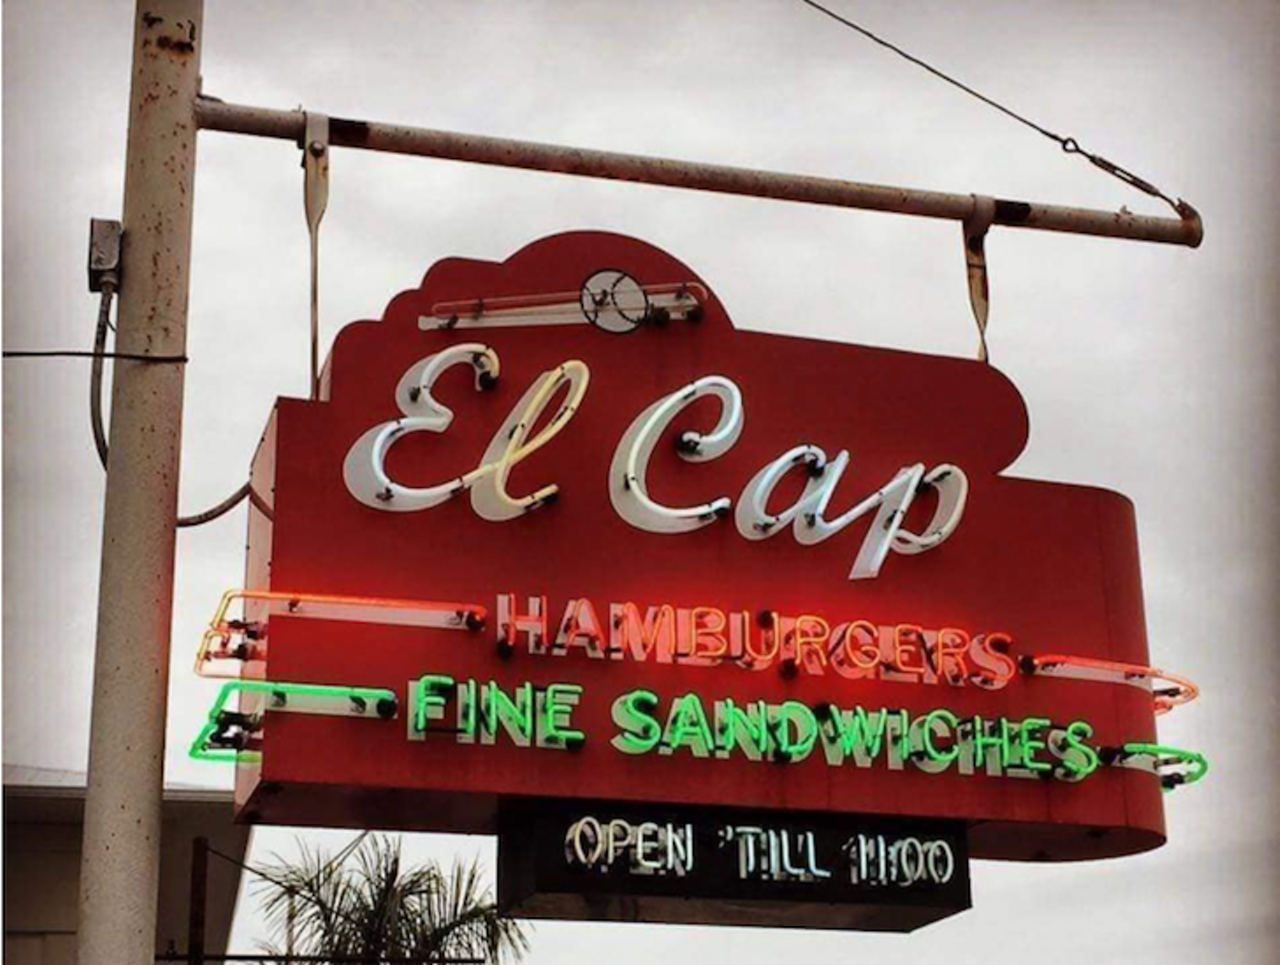 El Cap
3500 4th St. N, St. Petersburg
Check out this barlike dig for some freshly sandwiches, burgers and beer. El Caps&#146; menu has remained unchanged since it opened in 1964, including its inflation-resistant prices. There's not an item on this menu more than $10.
Photo via El Cap/Facebook